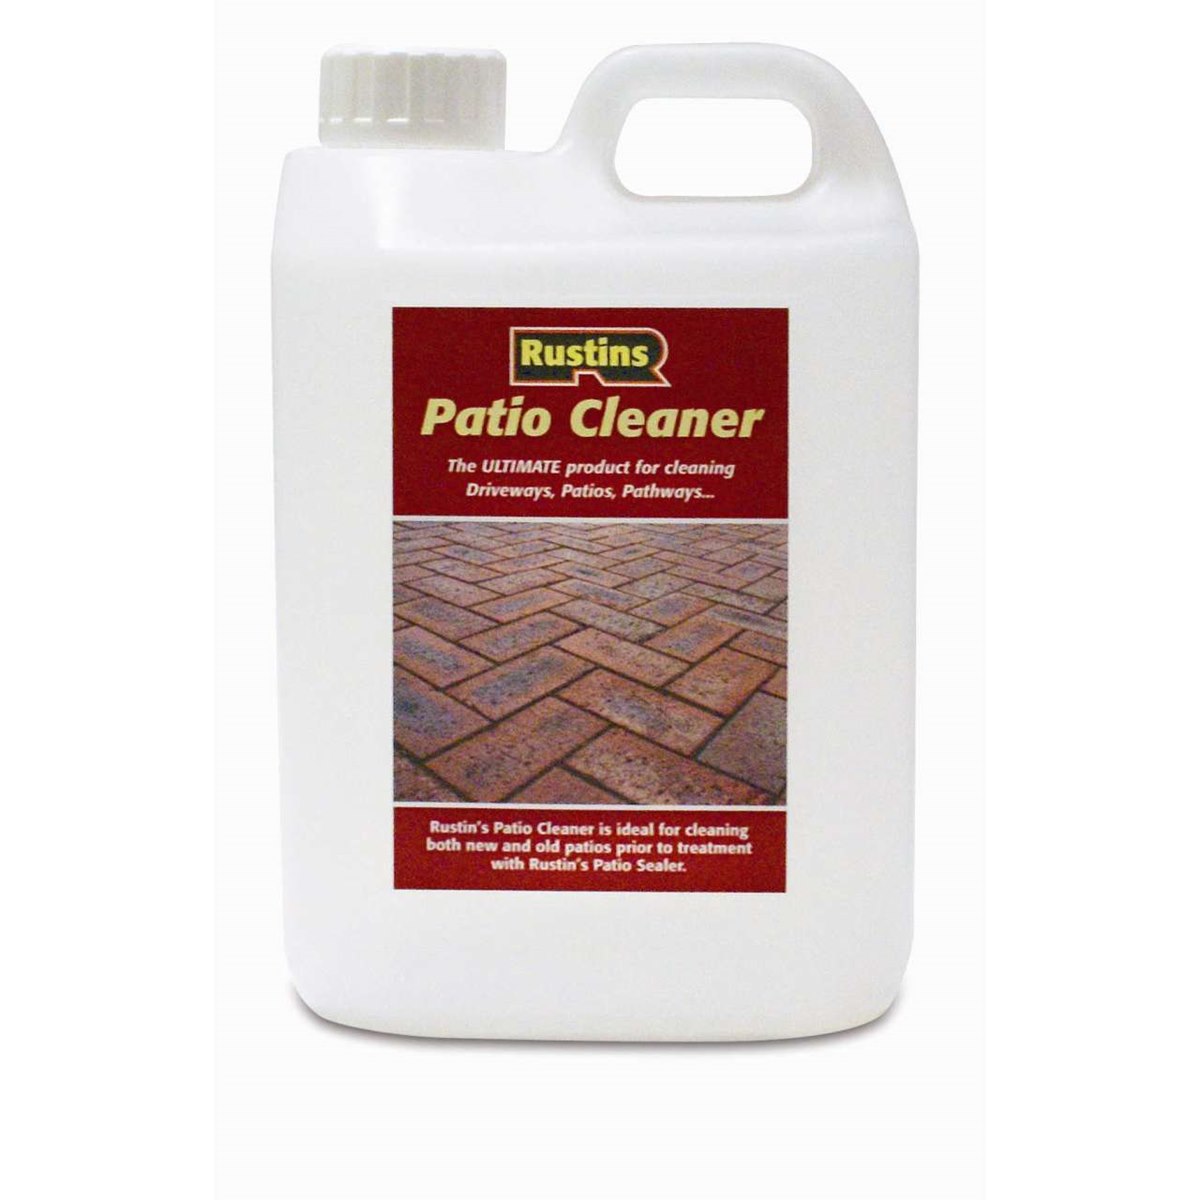 Rustins Patio Cleaner 2 Litre